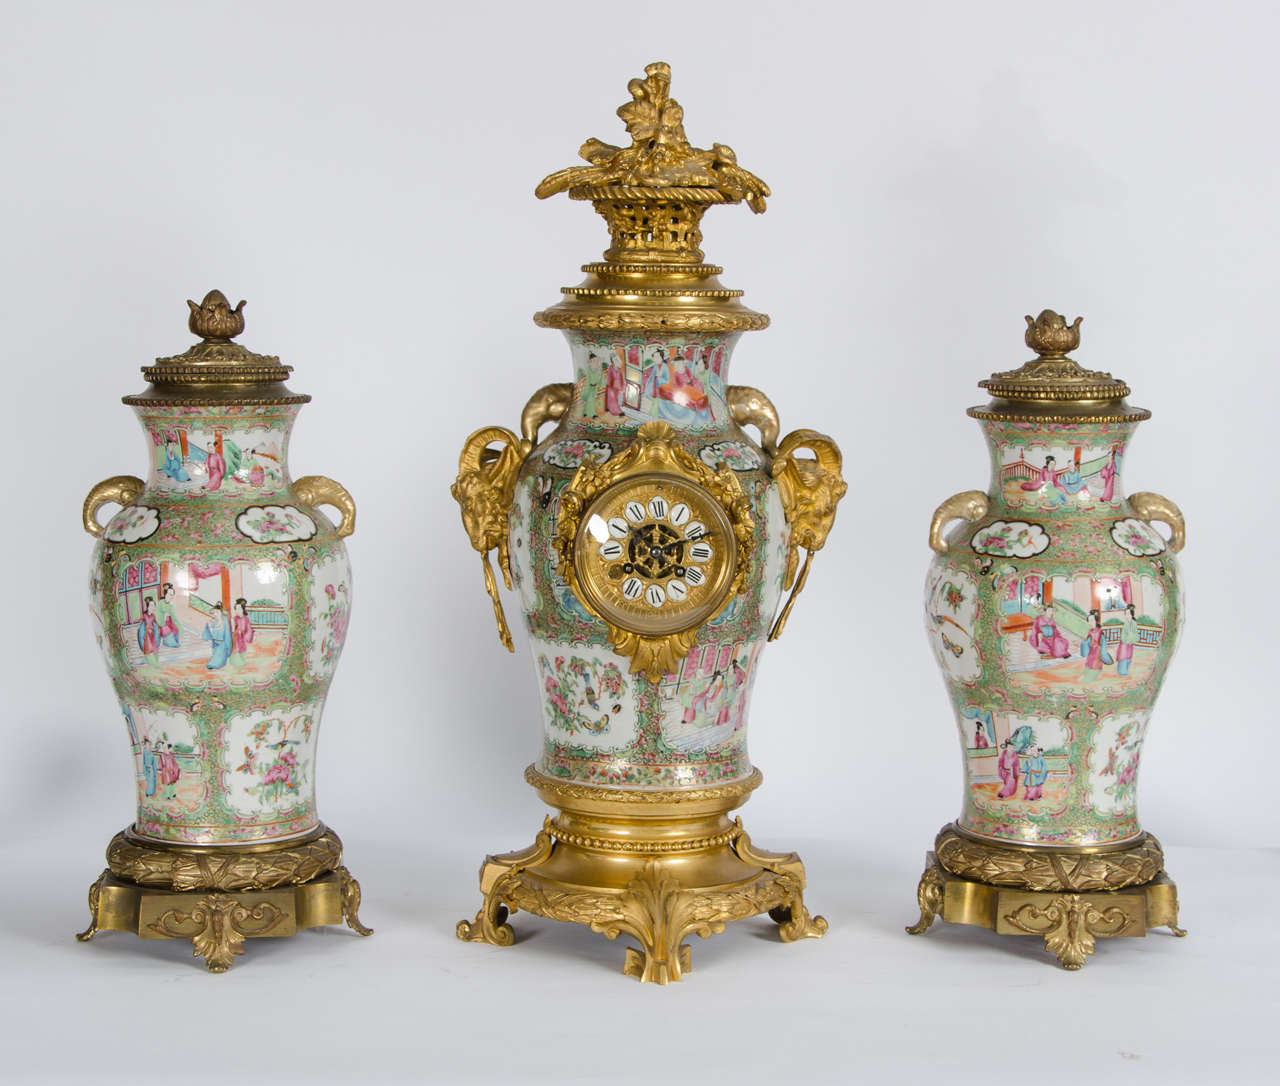 A very decorative Chinese canton porcelain and French ormolu-mounted clock garniture, having a pair of vases either side of the clock. The mounts to the clock with scrolling foliage and ram's heads.